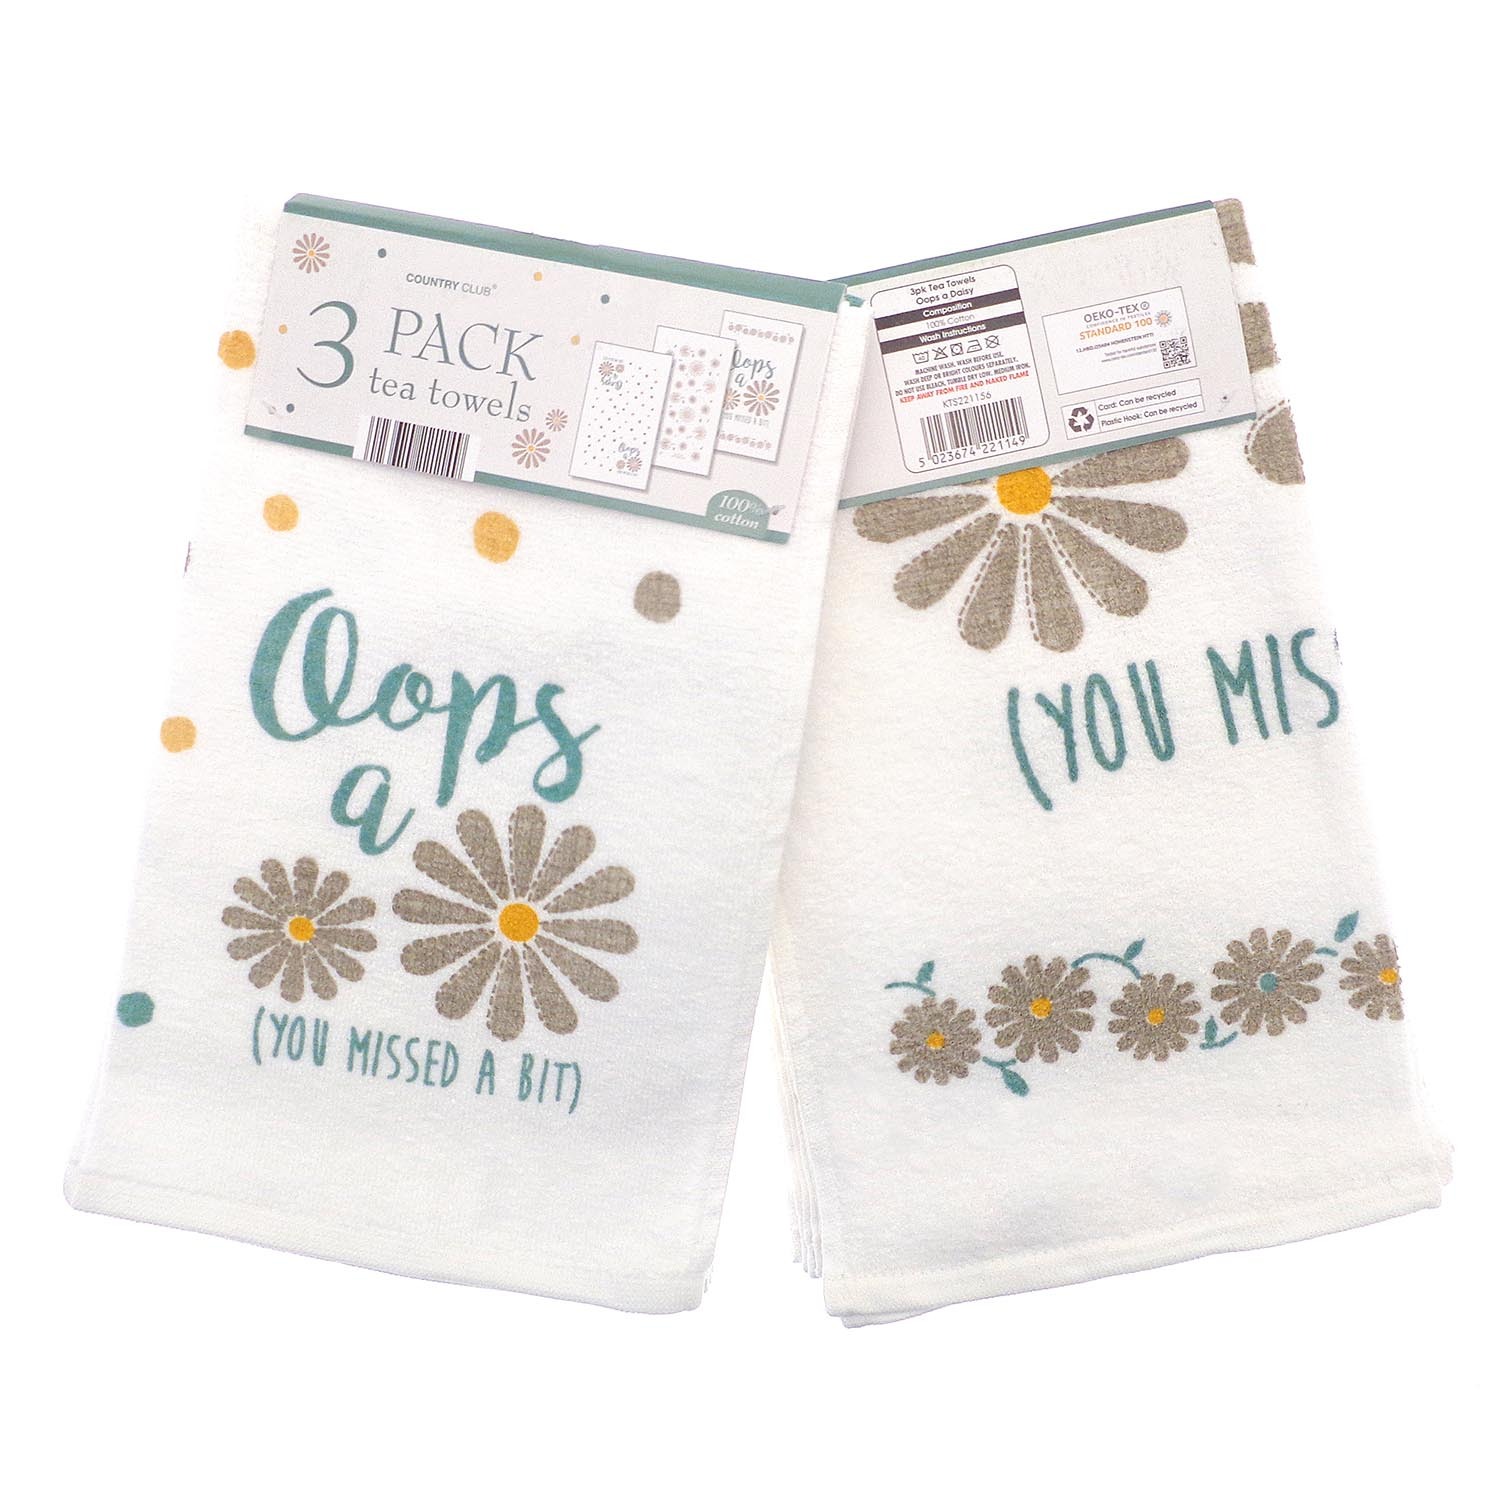 Pack of 3 Oops a Daisy Tea Towels - White Image 1